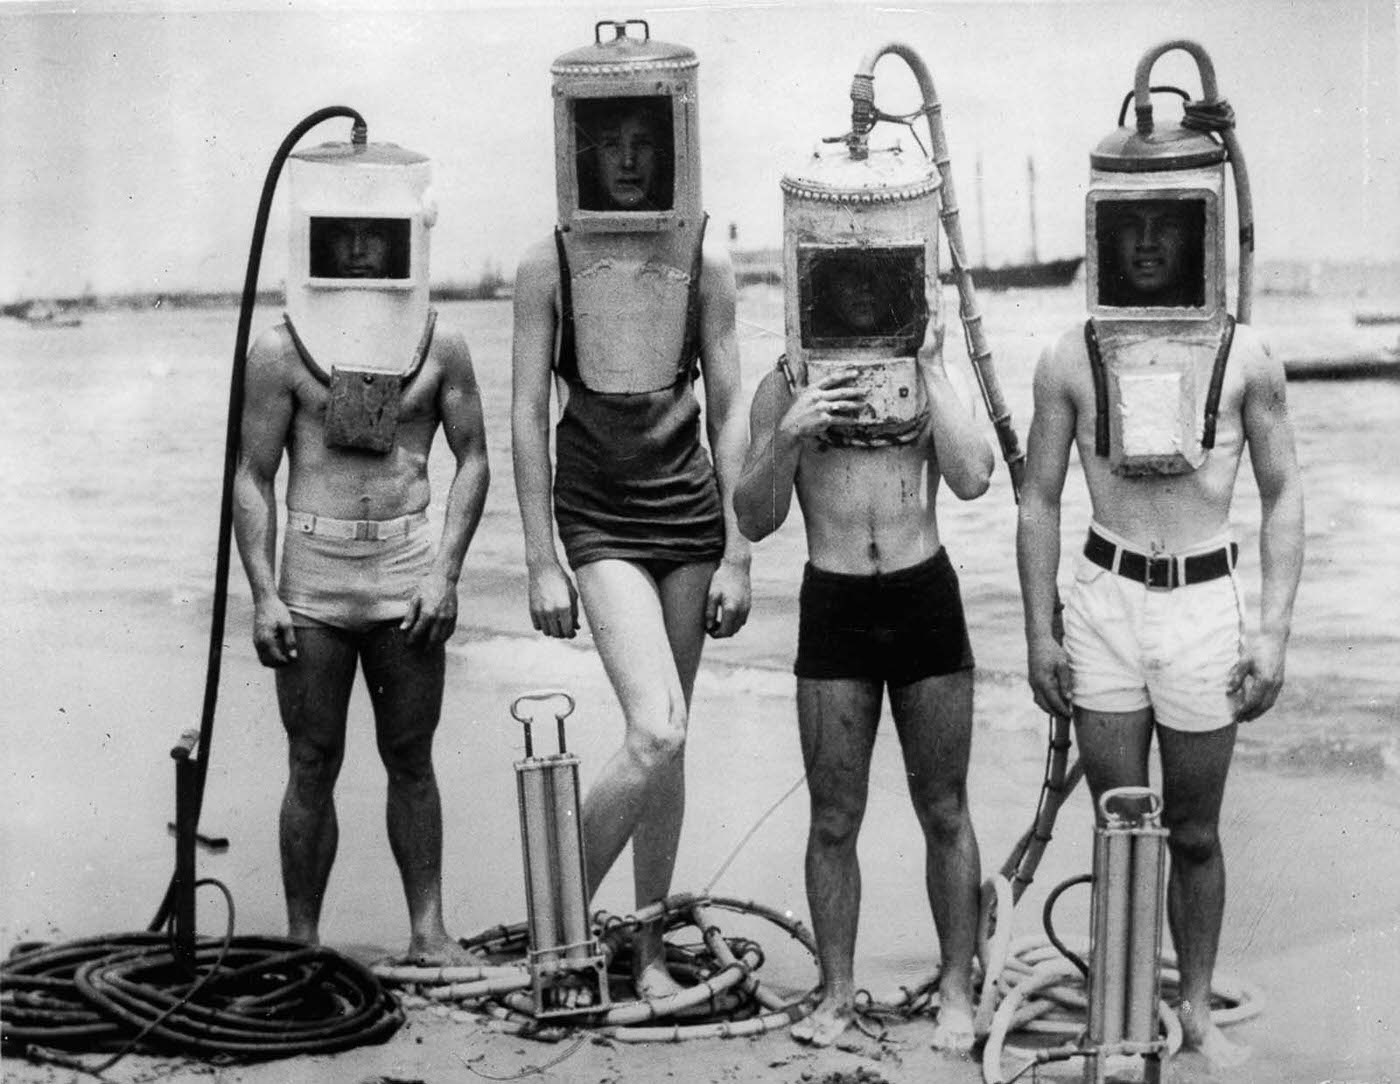 A group of Los Angeles boys show off diving helmets made from sections of hot water heaters, boilers and other easily secured junk. 1933.